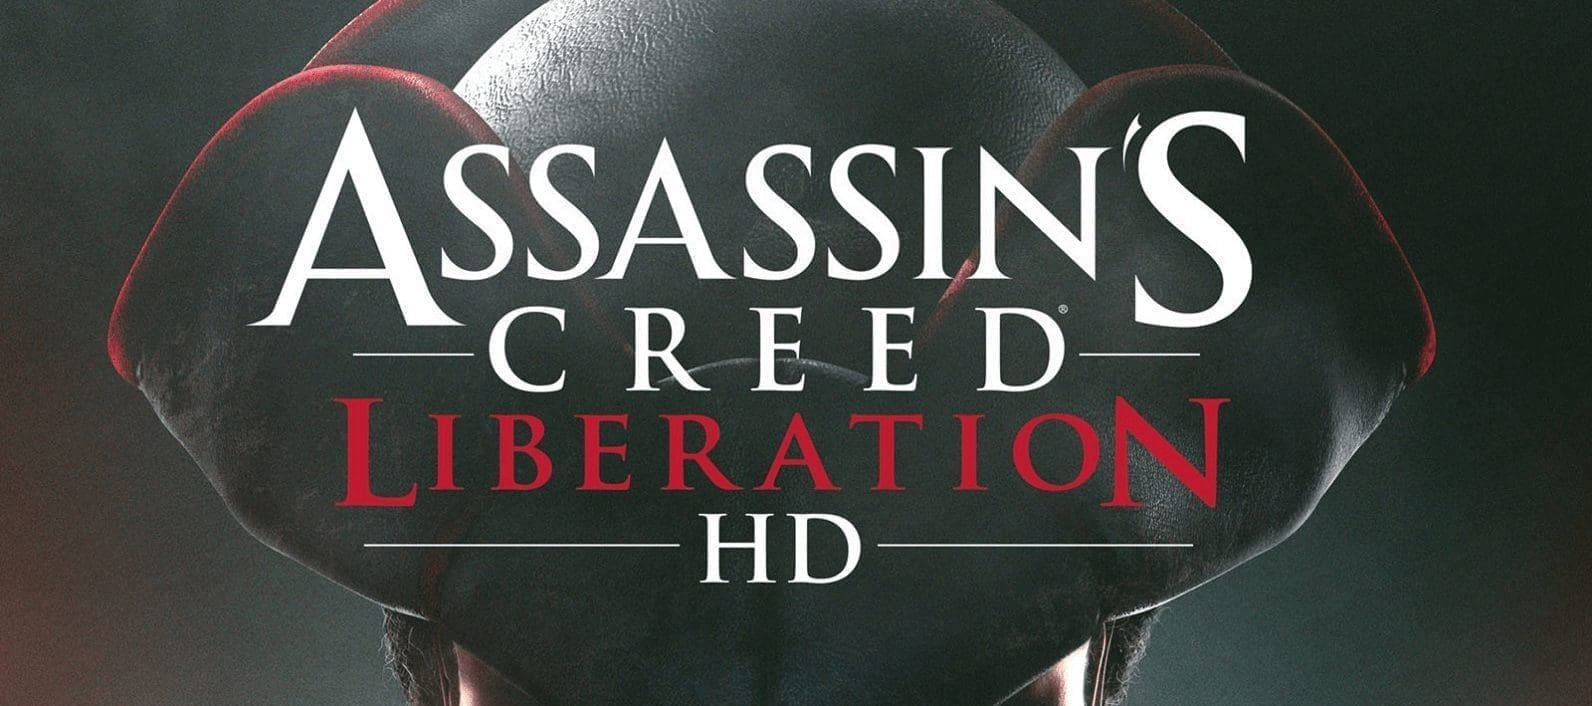 Assassin's Creed, Assassin's Creed Liberation, Assassin's Creed Liberation HD, Aveline, pc, playstation, Ubisoft, video games, xbox